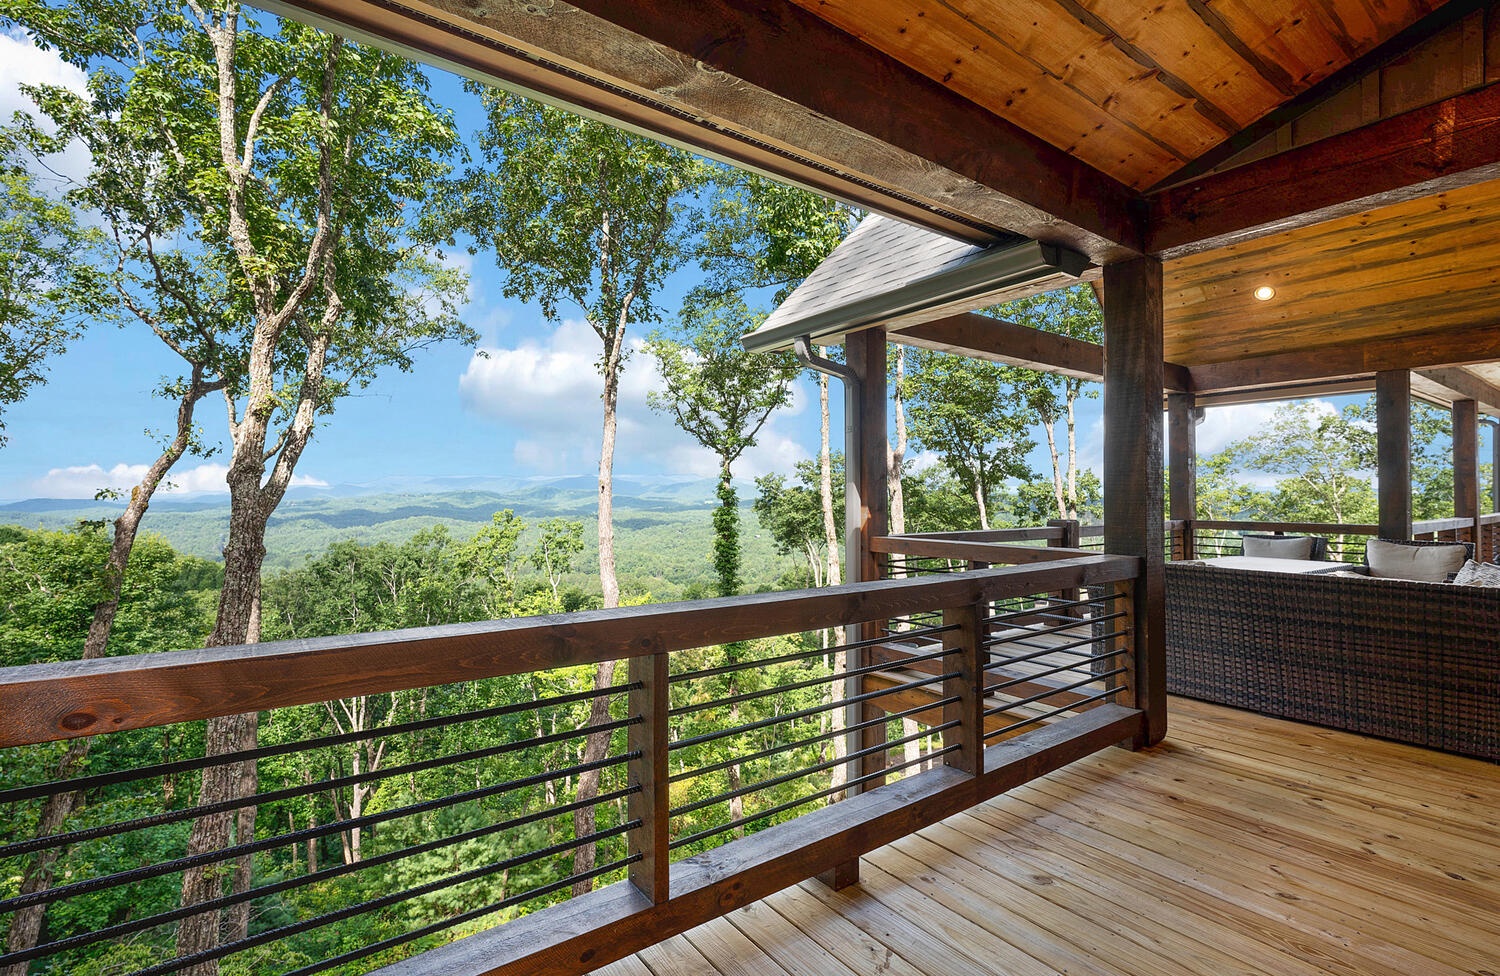 All Decked Out- Entry level deck with the mountain view